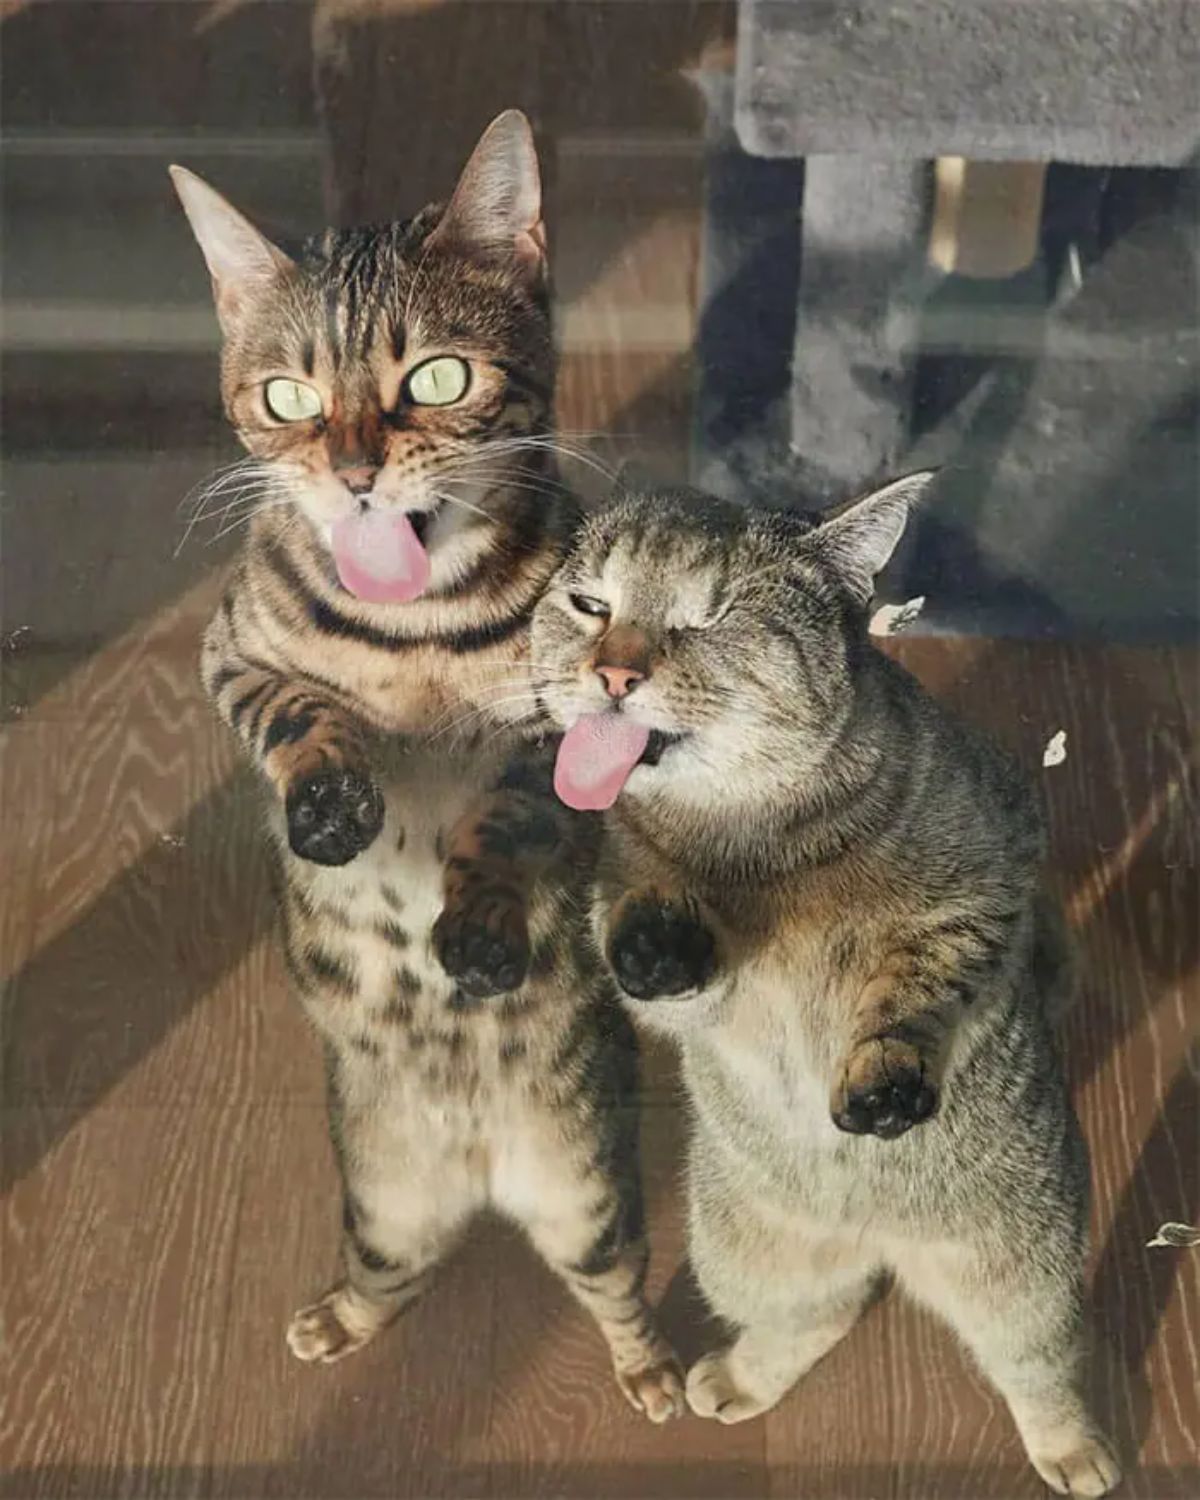 2 brown tabby cats licking a glass door with their tongues sticking out